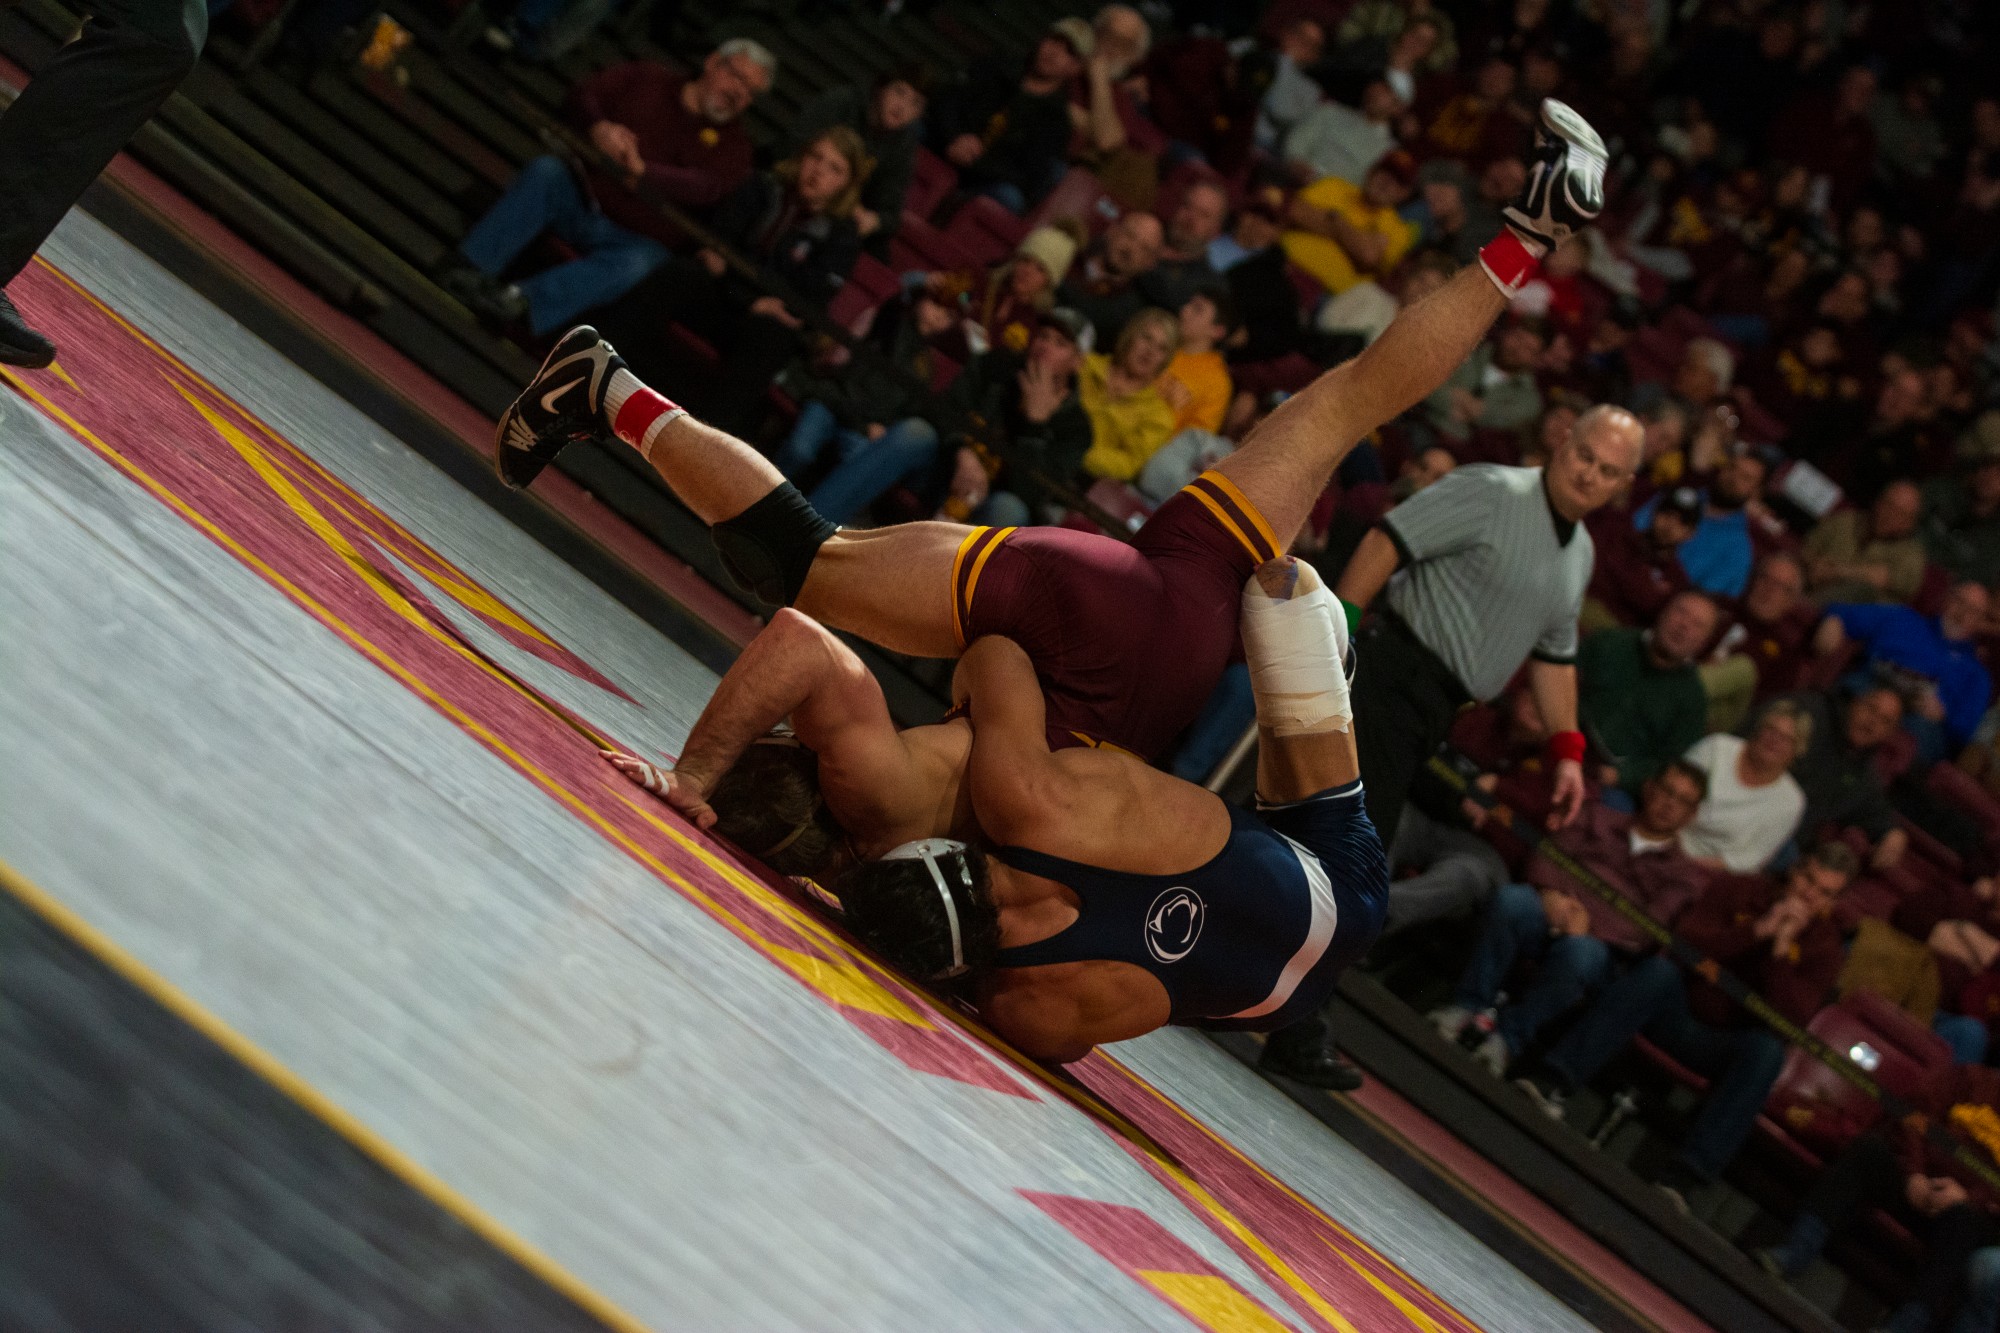 Gophers Redshirt Freshman Garrett Joles is thrown by his opponent at Maturi Pavilion on Sunday, Feb. 9. The Gophers lost to Penn State 31-10.